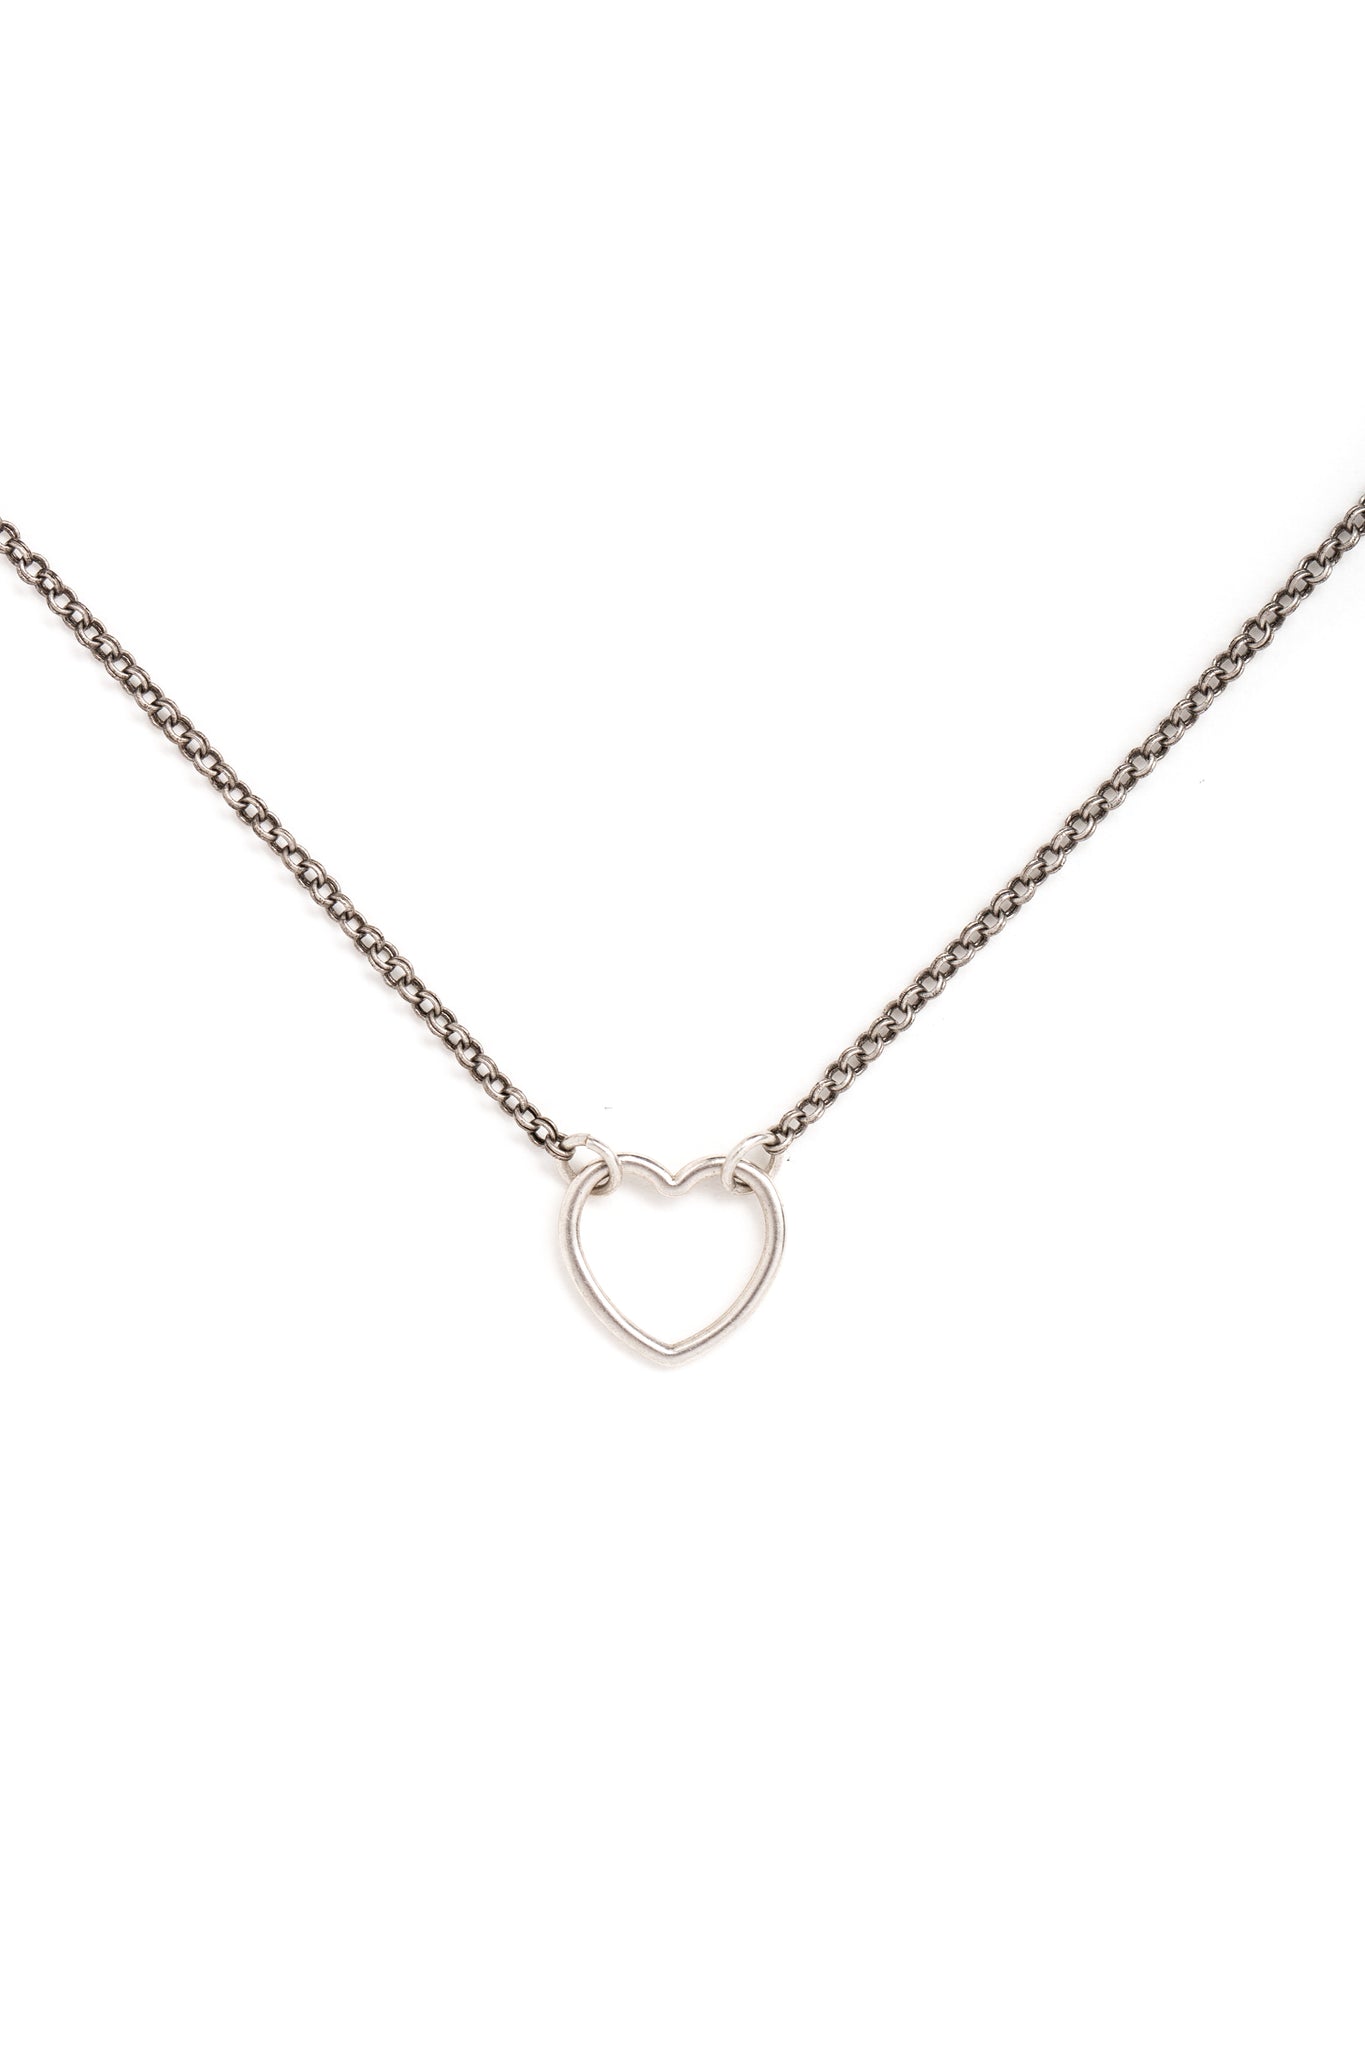 Silver Heart Necklace on Silver Chain